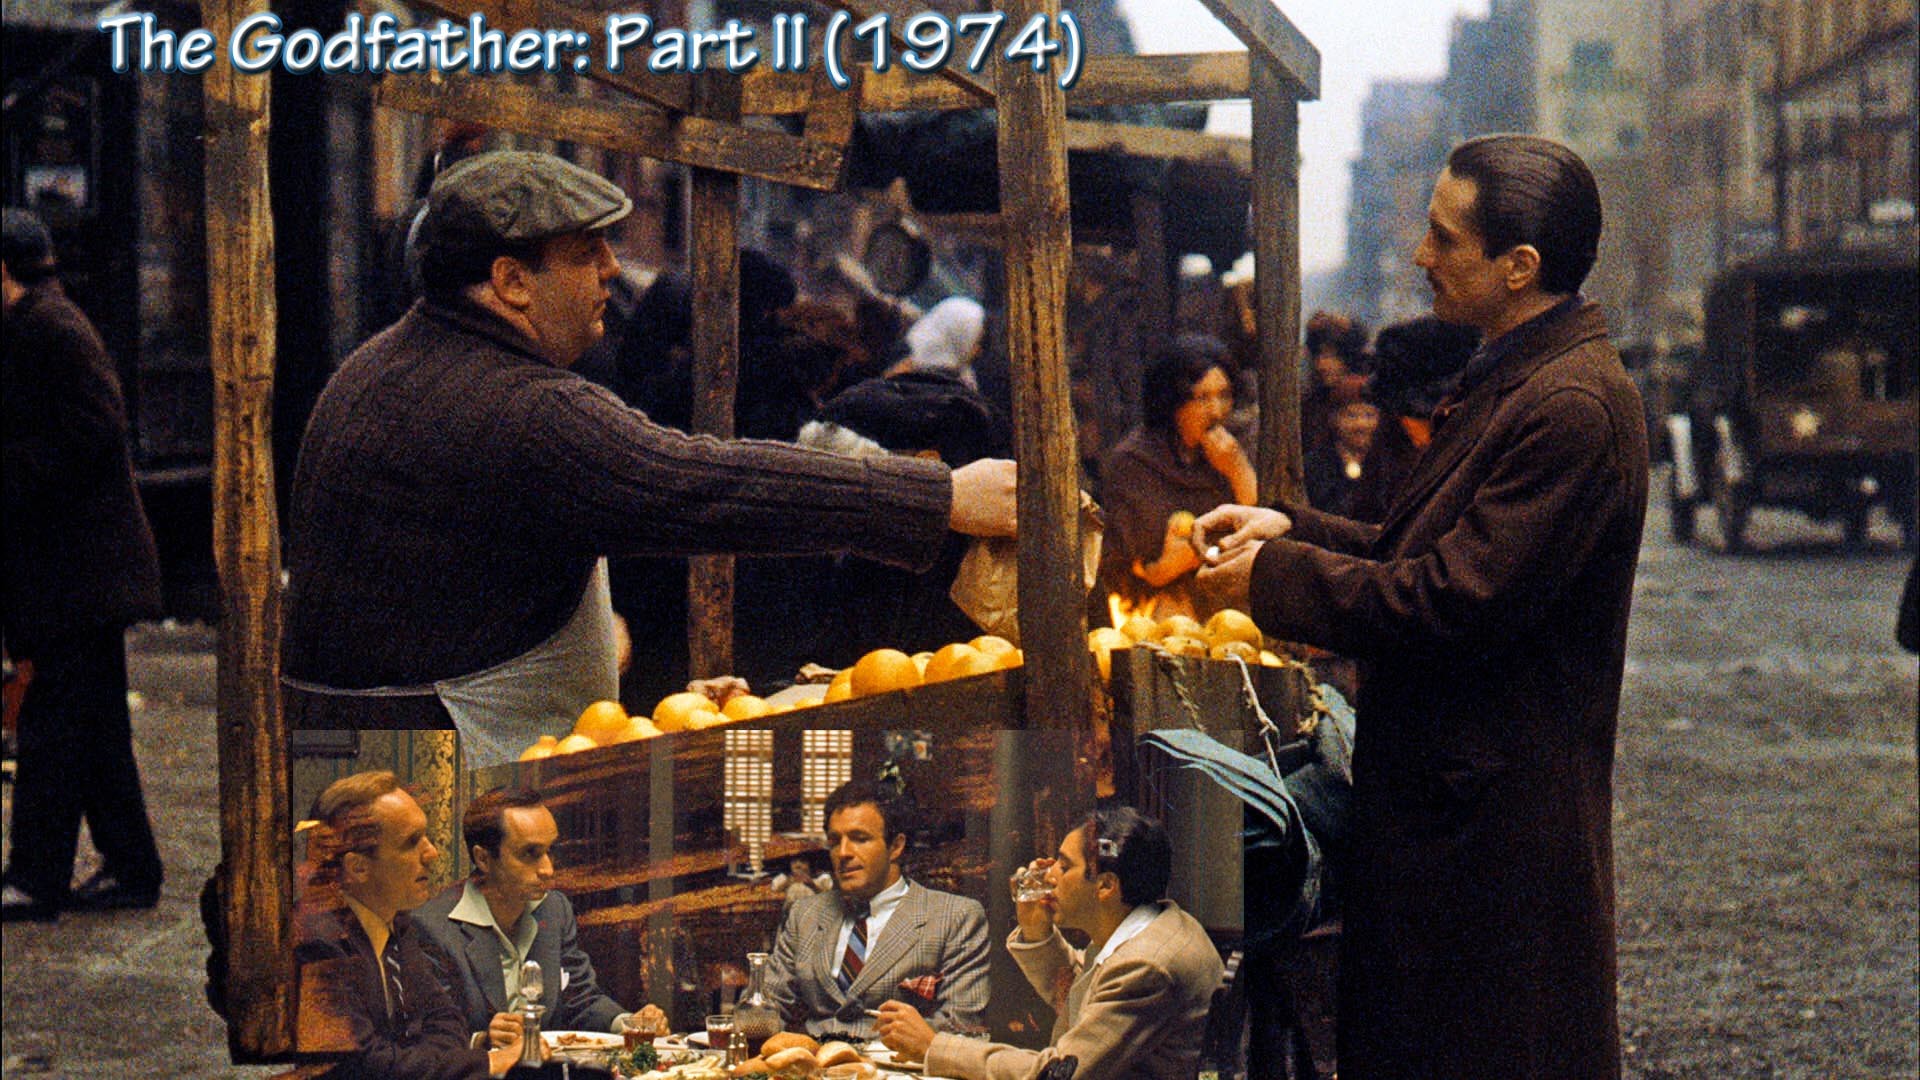 1920x1080 The Godfather: Part II 1974 - Classic Movies Wallpaper (34307087 .